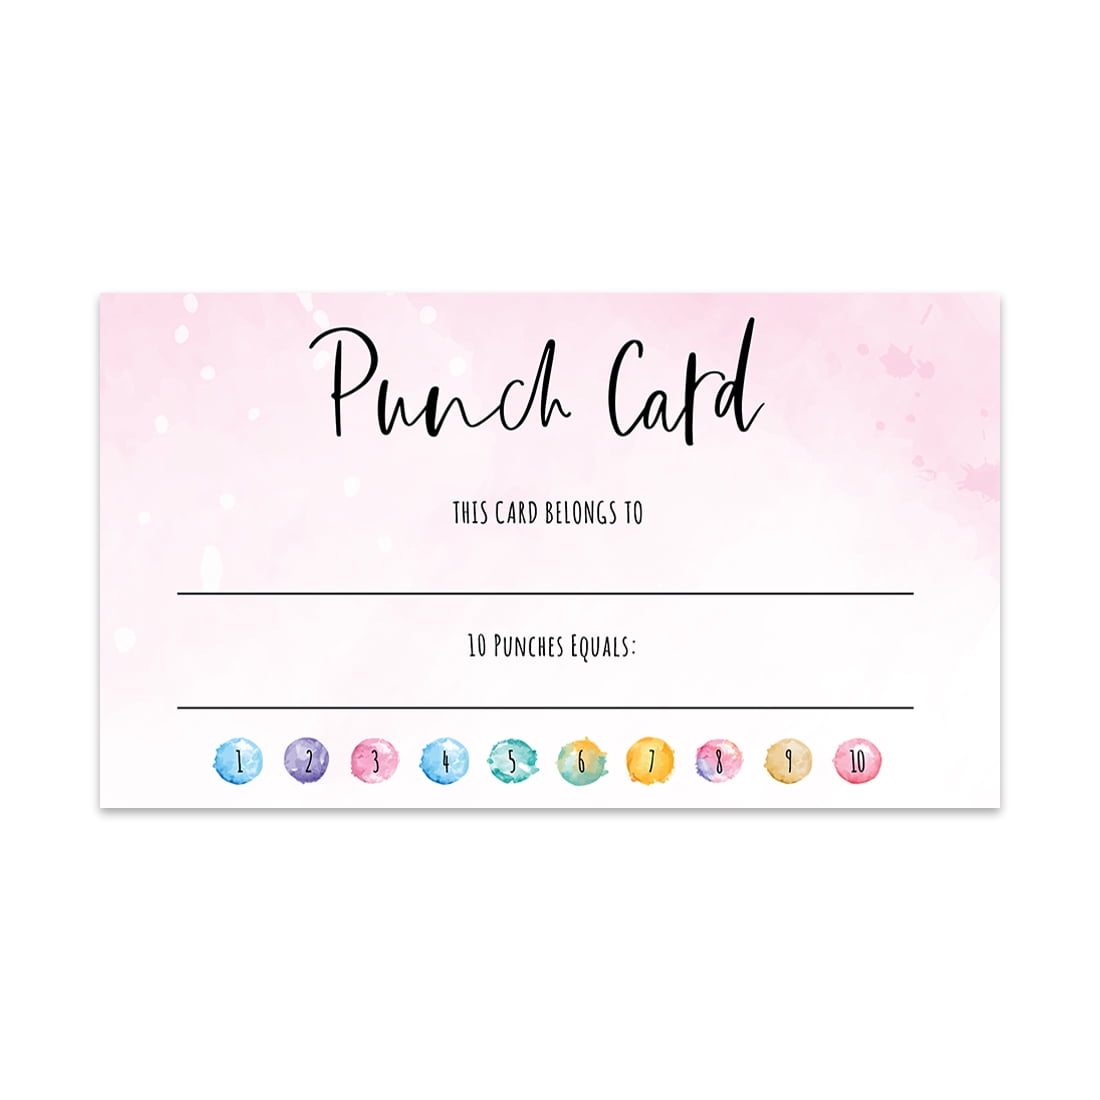 Koyal Wholesale Barber Shop Reward Punch Cards, Loyalty Cards for Small  Business Customers, Award Cards, 100-Pack 